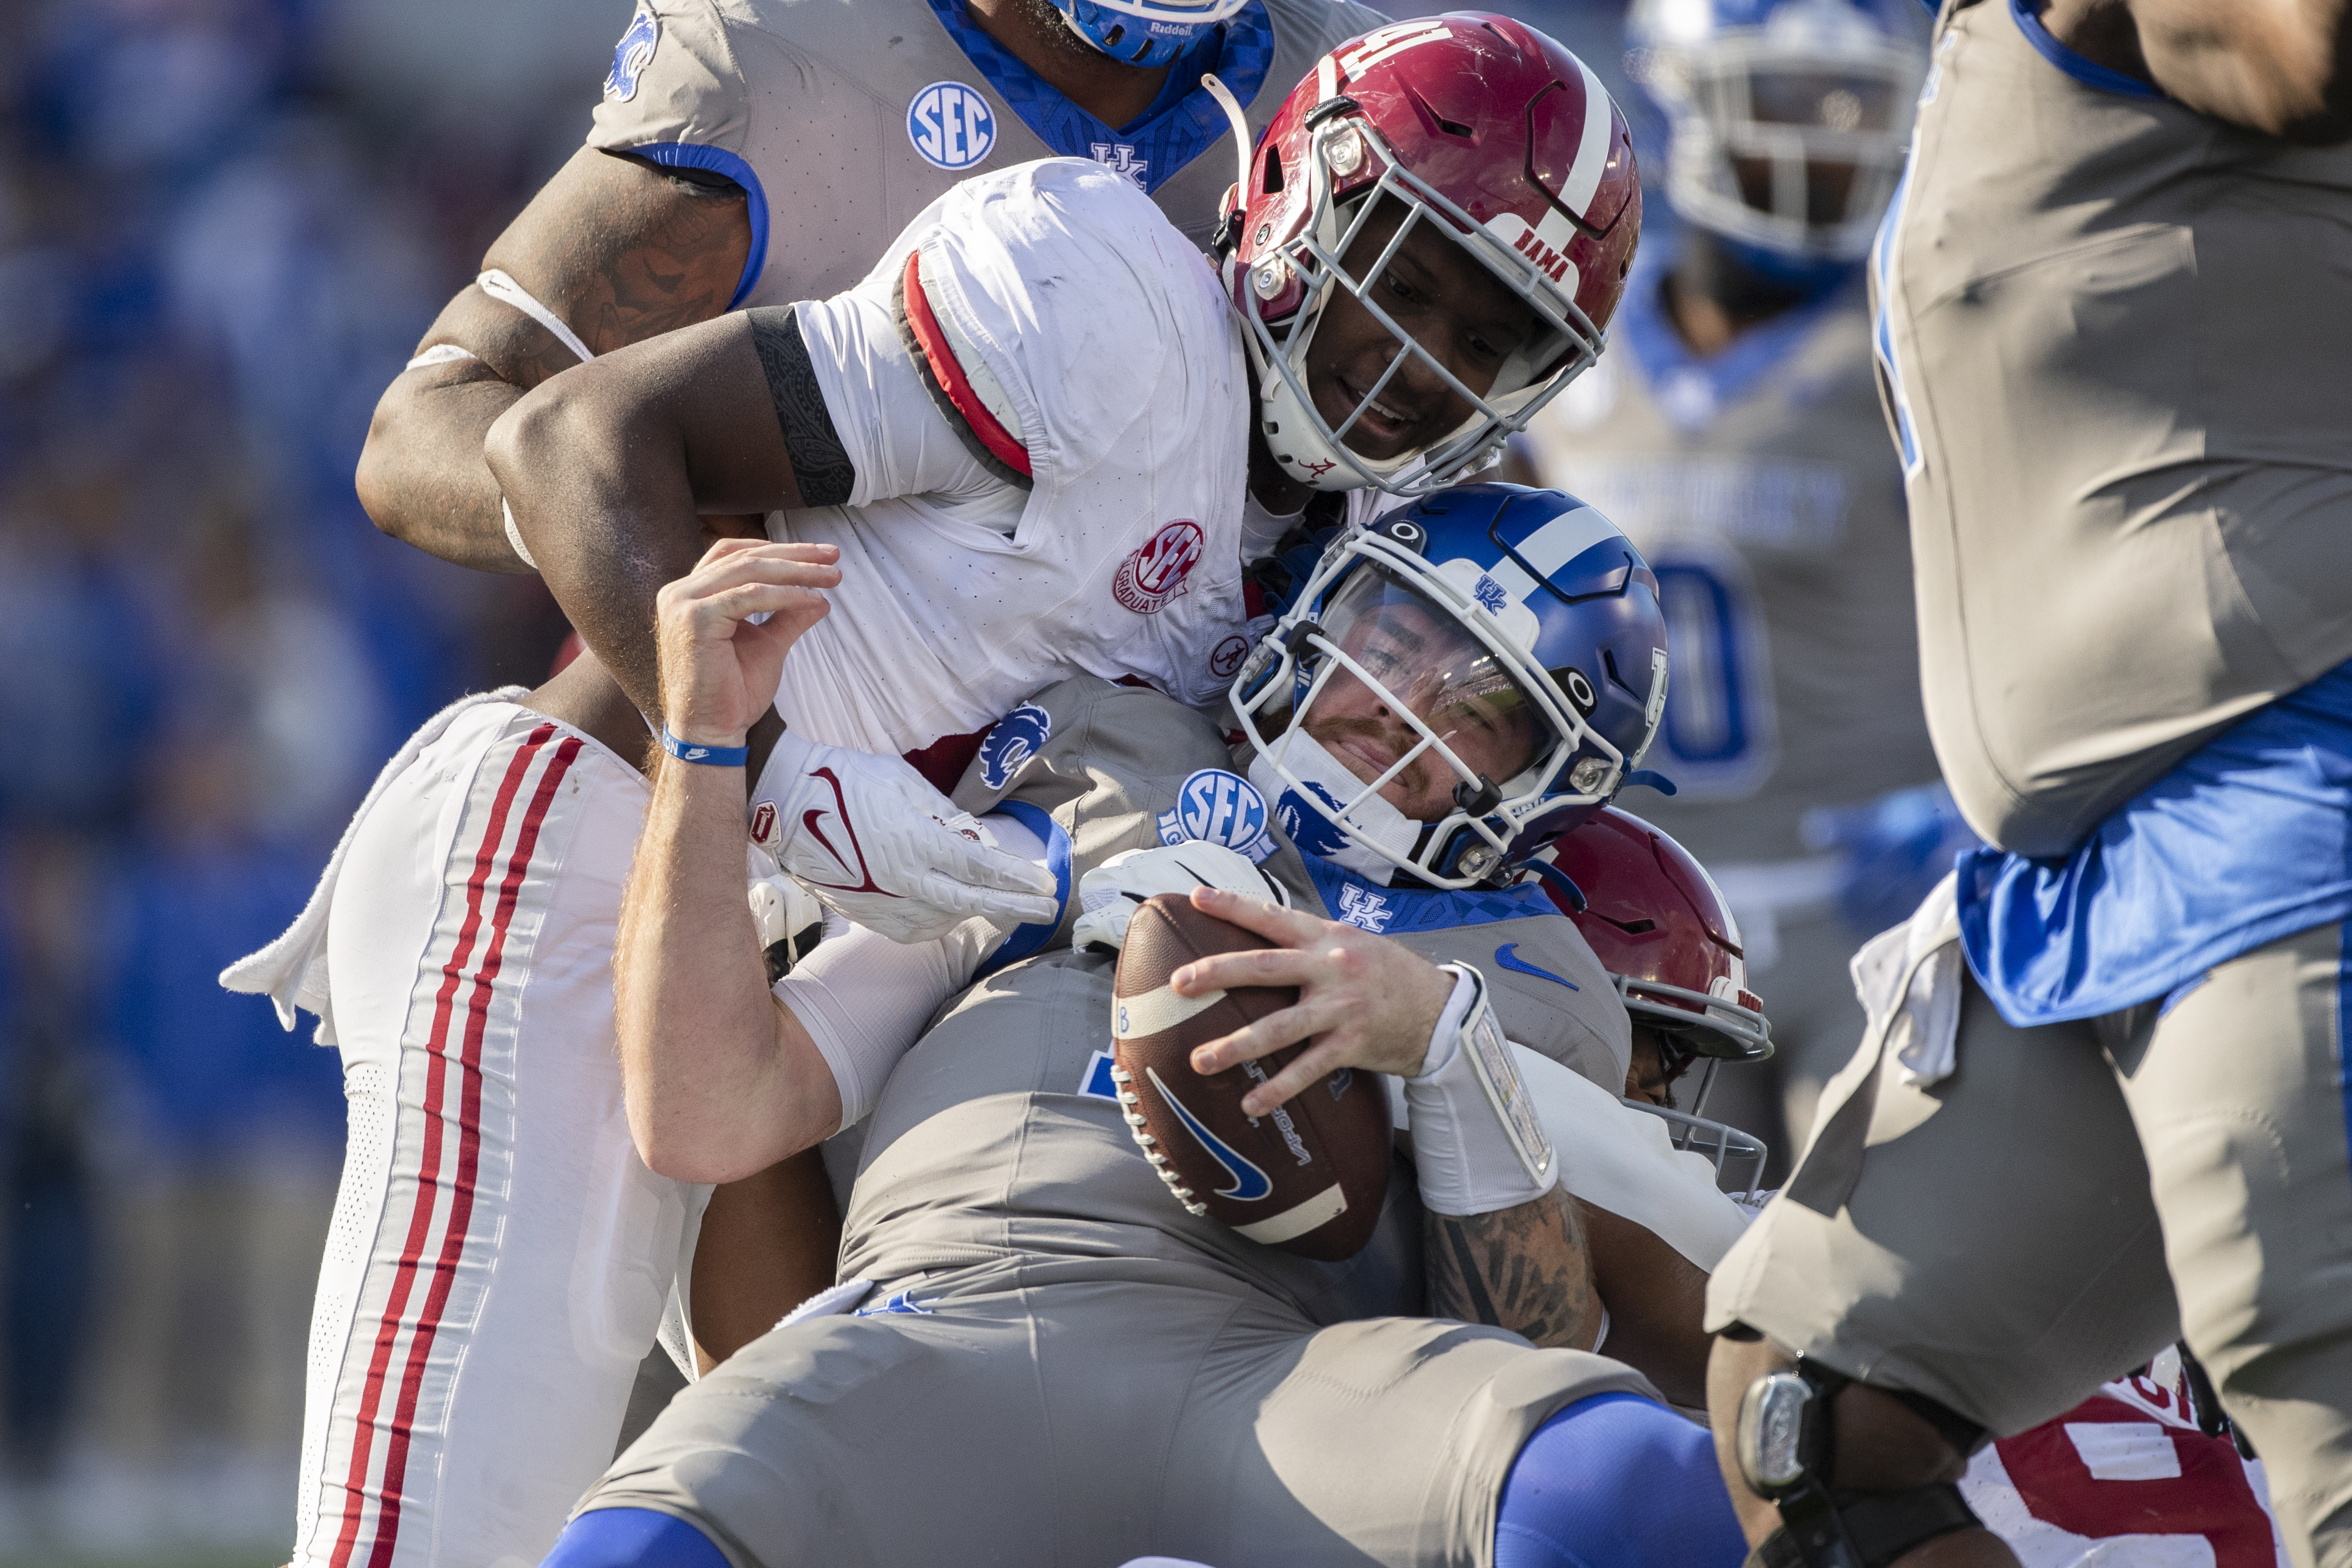 Alabama clinches the SEC West after 49-21 win over Kentucky